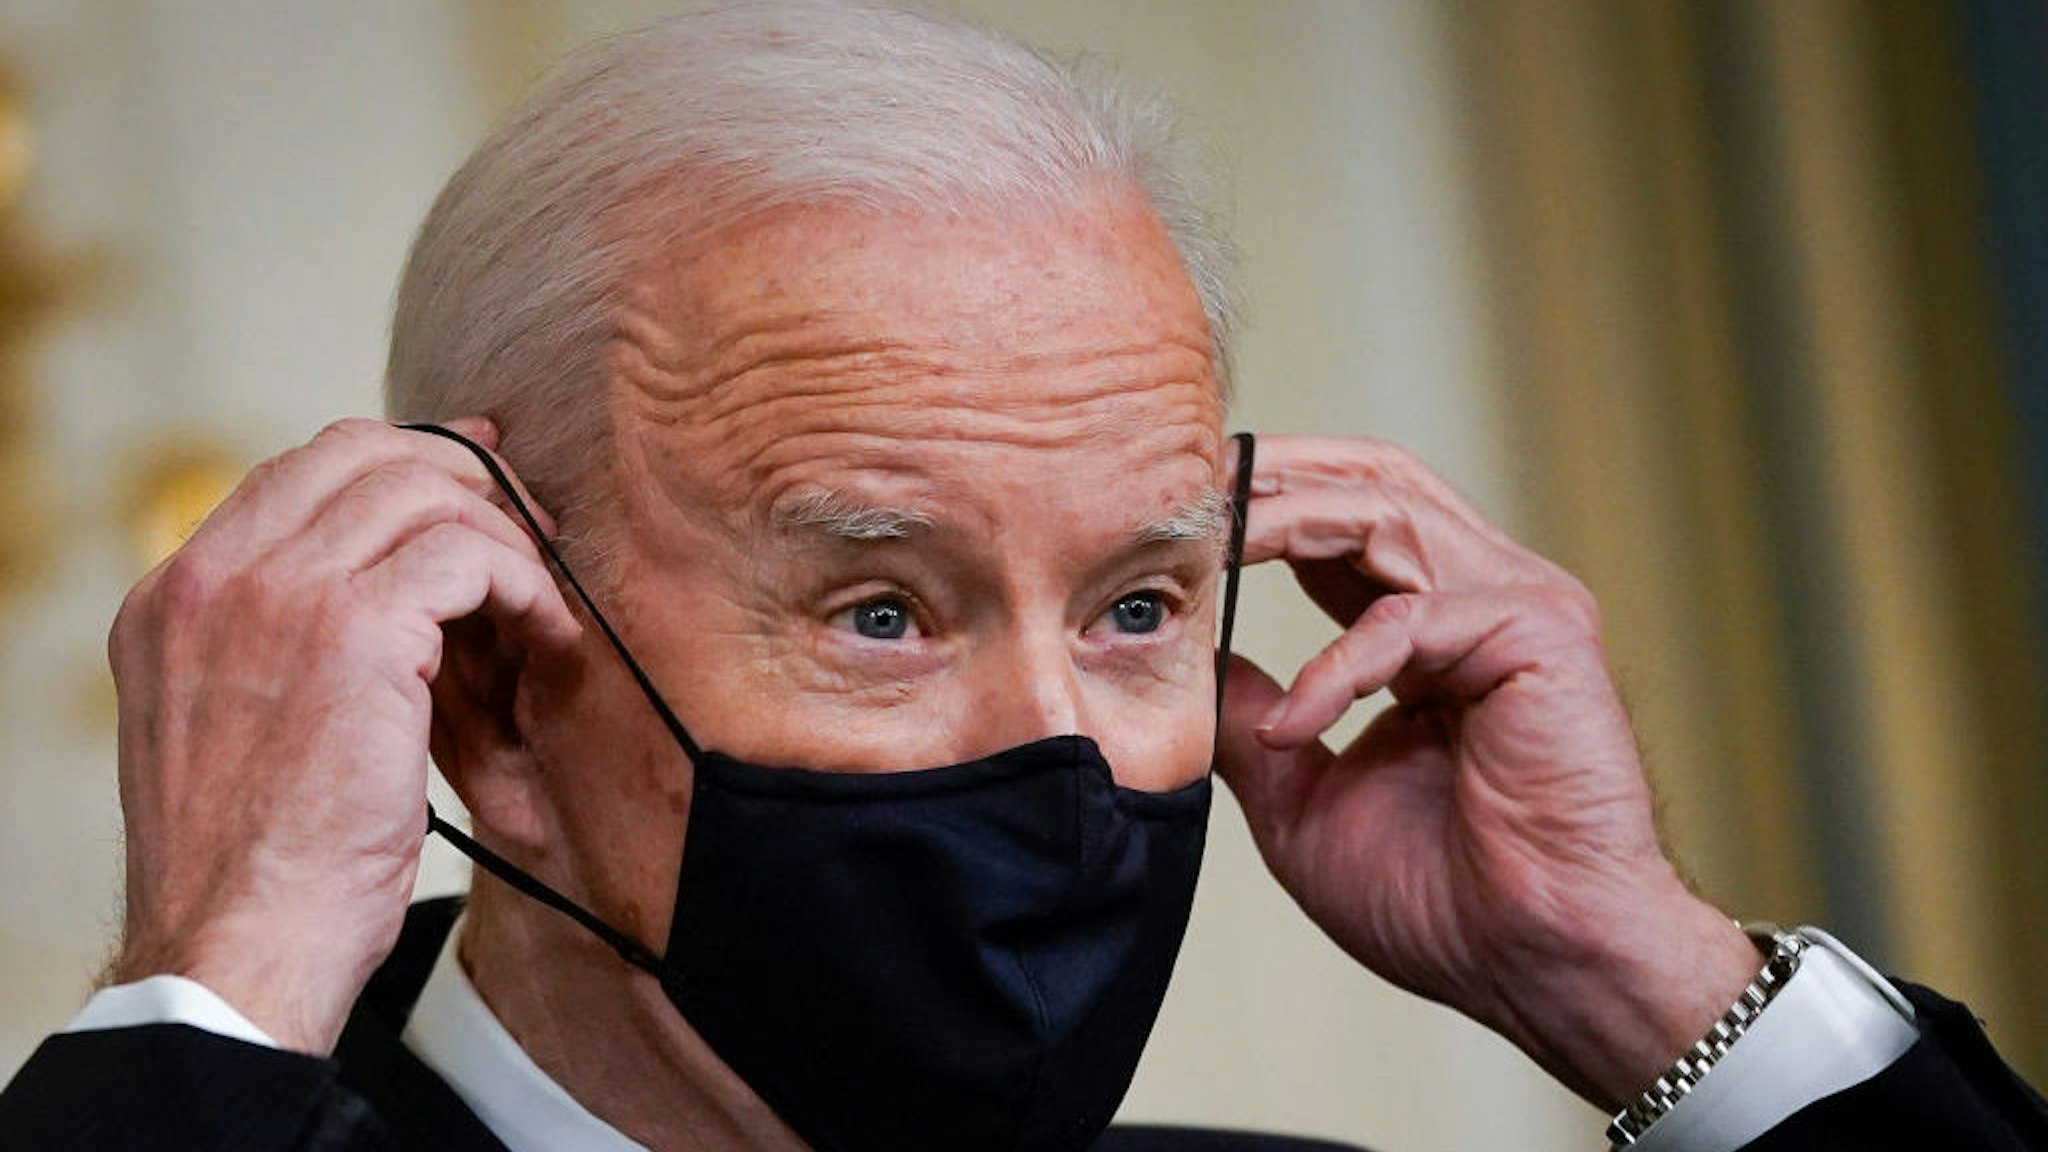 WASHINGTON, DC - MARCH 15: U.S. President Joe Biden puts on a face covering as he concludes his remarks in the State Dining Room of the White House on March 15, 2021 in Washington, DC. The administration announced on Monday that Gene Sperling, a former top economic official in the last two Democratic presidential administrations, will oversee the rollout of the $1.9 trillion coronavirus stimulus package that Biden signed into law last week. (Photo by Drew Angerer/Getty Images)